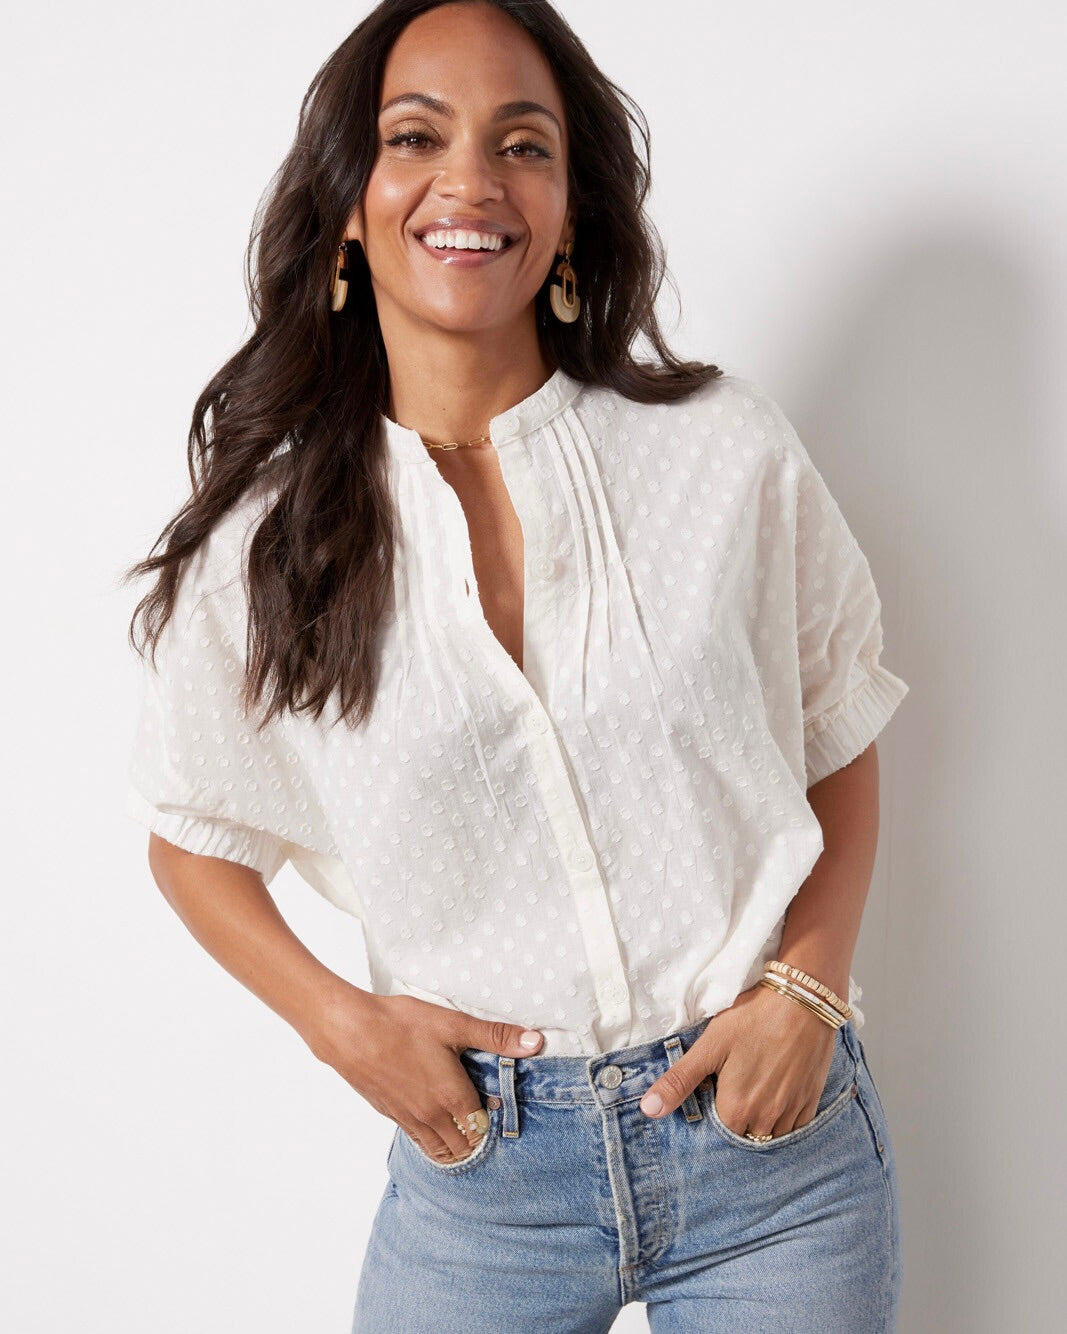 Model wearing Emerson Fry Mandarin Collar Top in Salt Swiss Dot white color wearing jeans on a white background